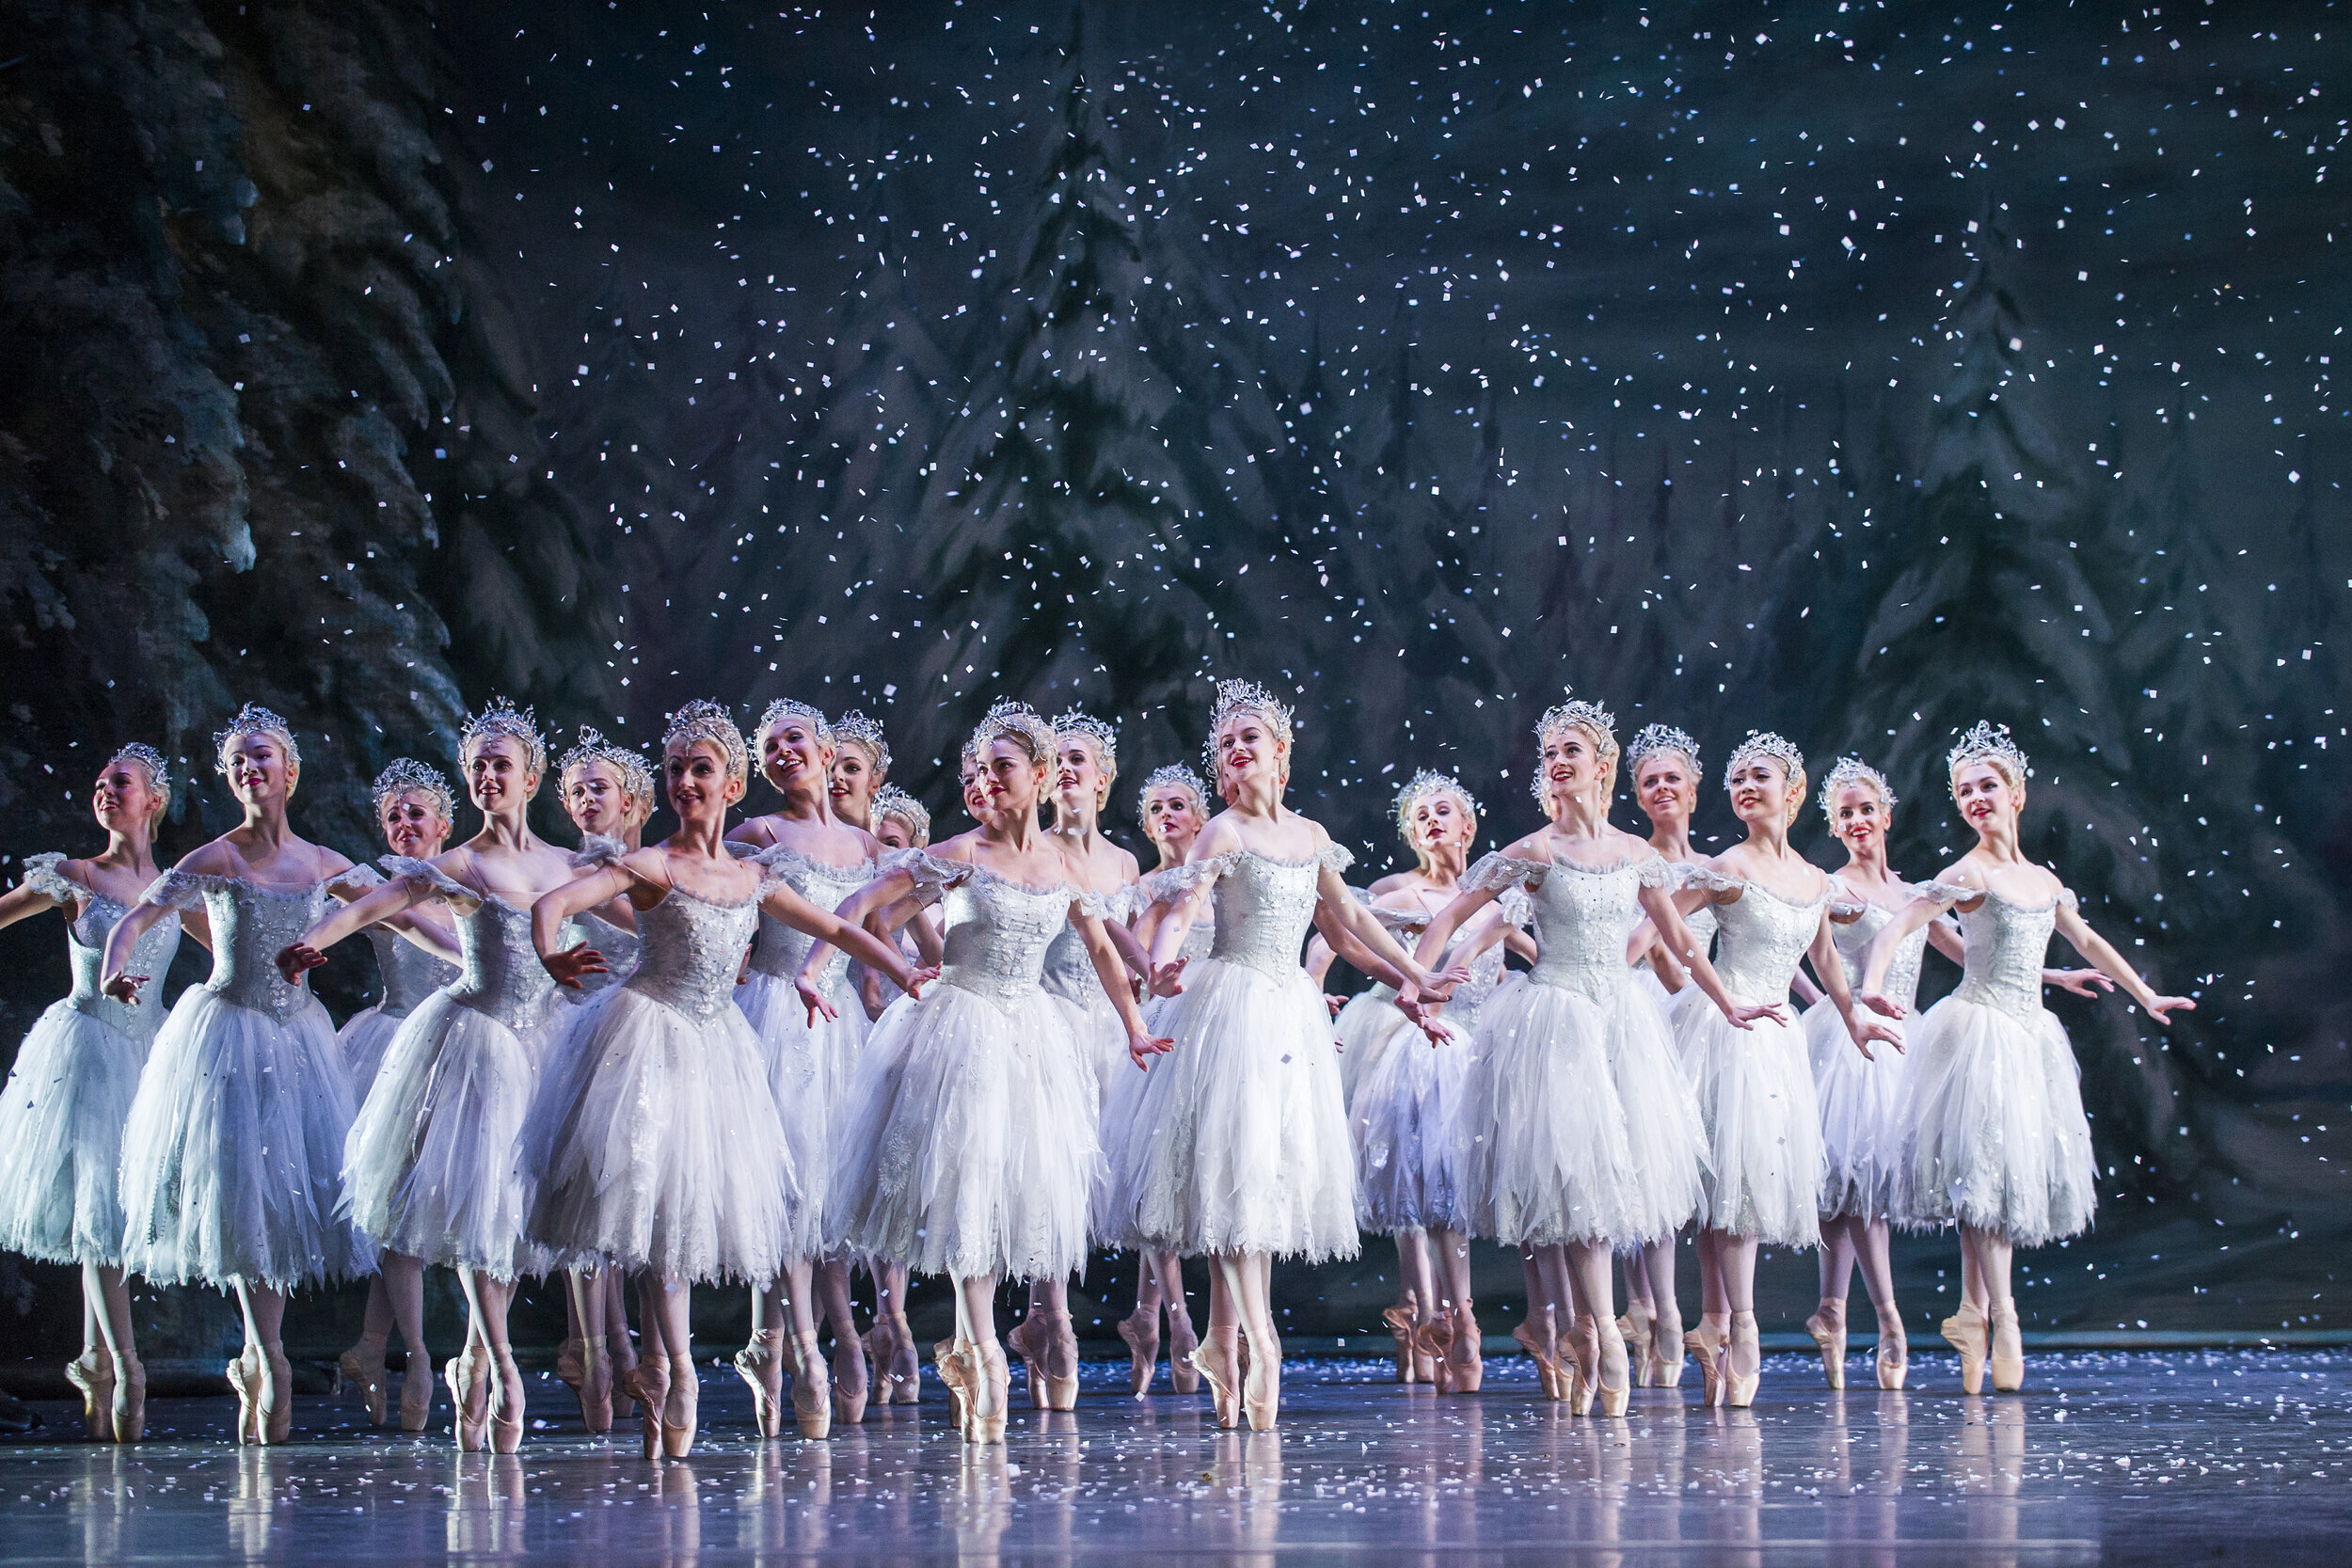 ROH 19-20_PRODUCTION IMAGE_THE NUTCRACKER_Artists of The Royal Ballet in The Nutcracker, The Royal Ballet (C) 2015 ROH. Photograph by Tristram Kenton.jpg